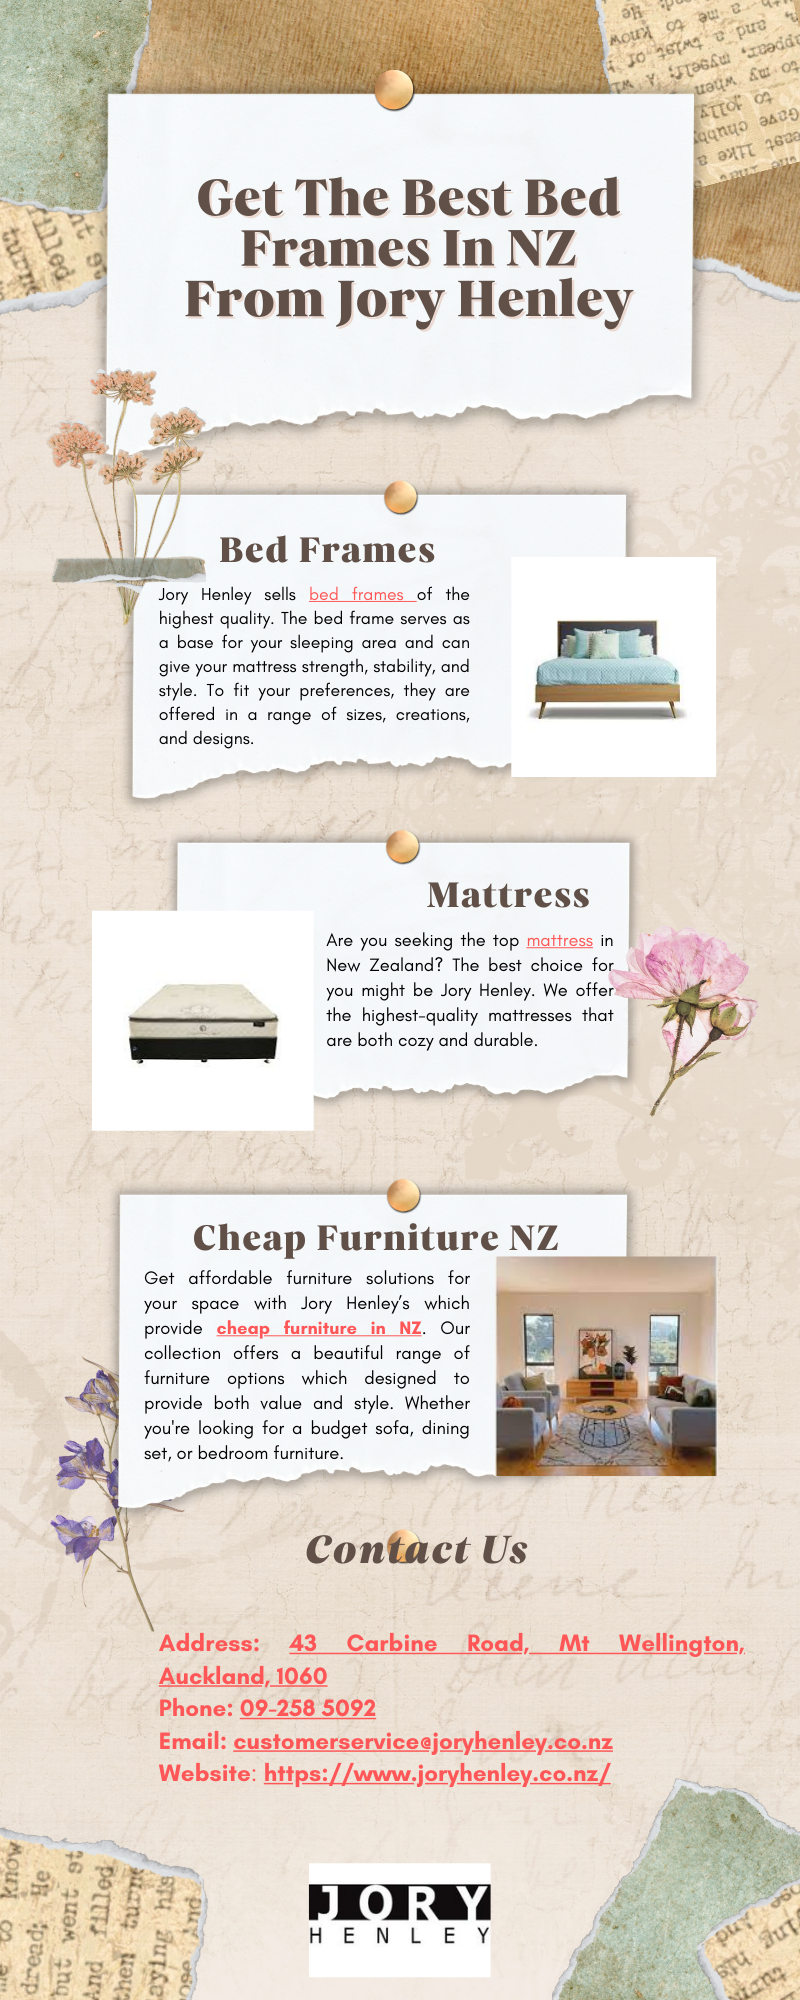 Get The Best Bed Frames In NZ From Jory Henley